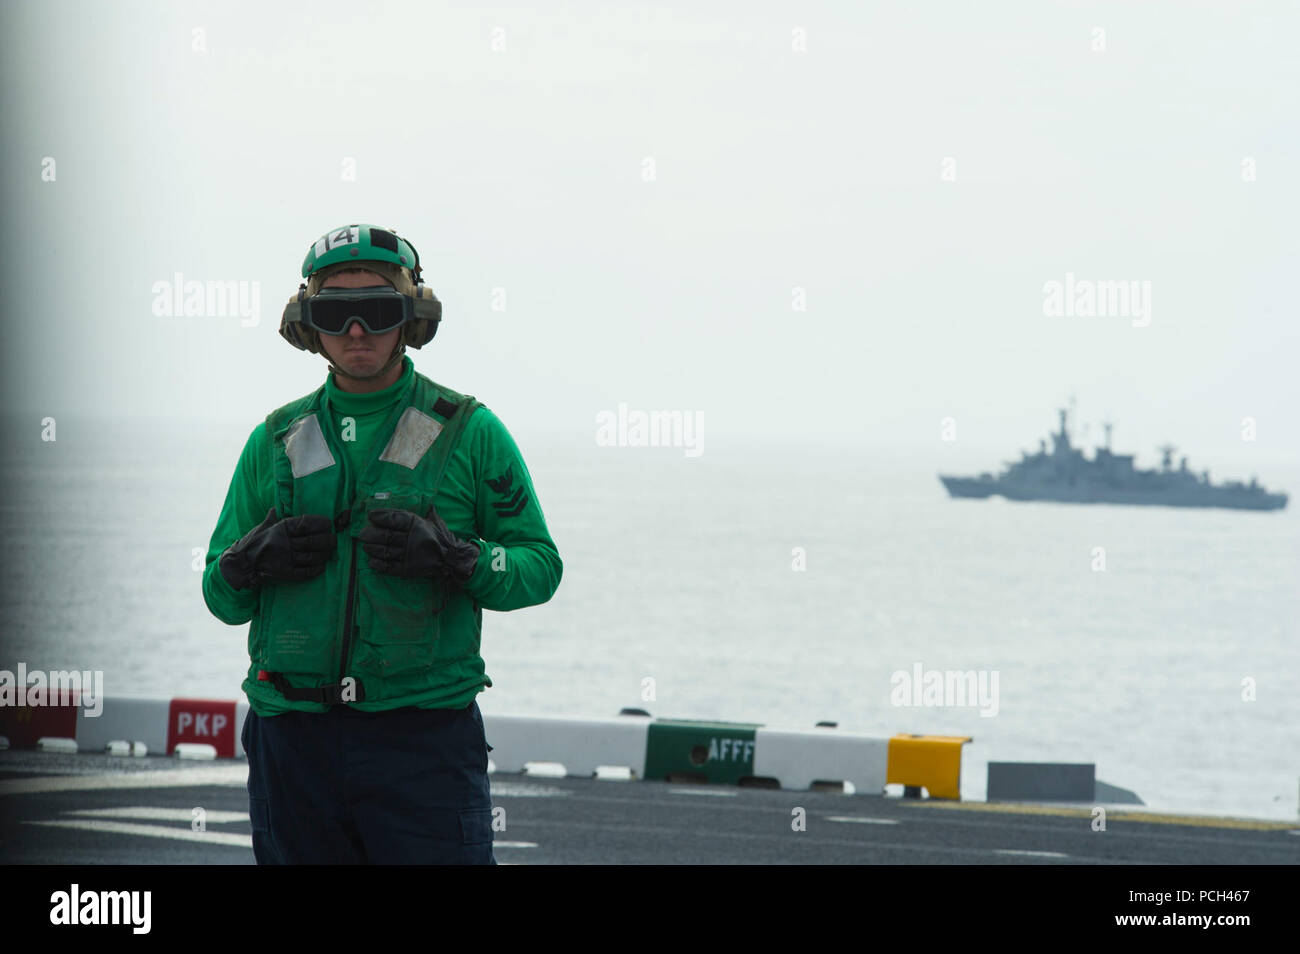 A U.S. Sailor assigned to amphibious assault ship USS America (LHA 6) waits on the flight deck as the Chilean navy frigate CNS Capitan Prat (FFGM 11), background, sails nearby during a bilateral exercise Aug. 27, 2014, in the Pacific Ocean. The America embarked on a mission to conduct training engagements with partner nations throughout the Americas before reporting to its new home port of San Diego. The ship was set to be ceremoniously commissioned Oct. 11, 2014. Stock Photo